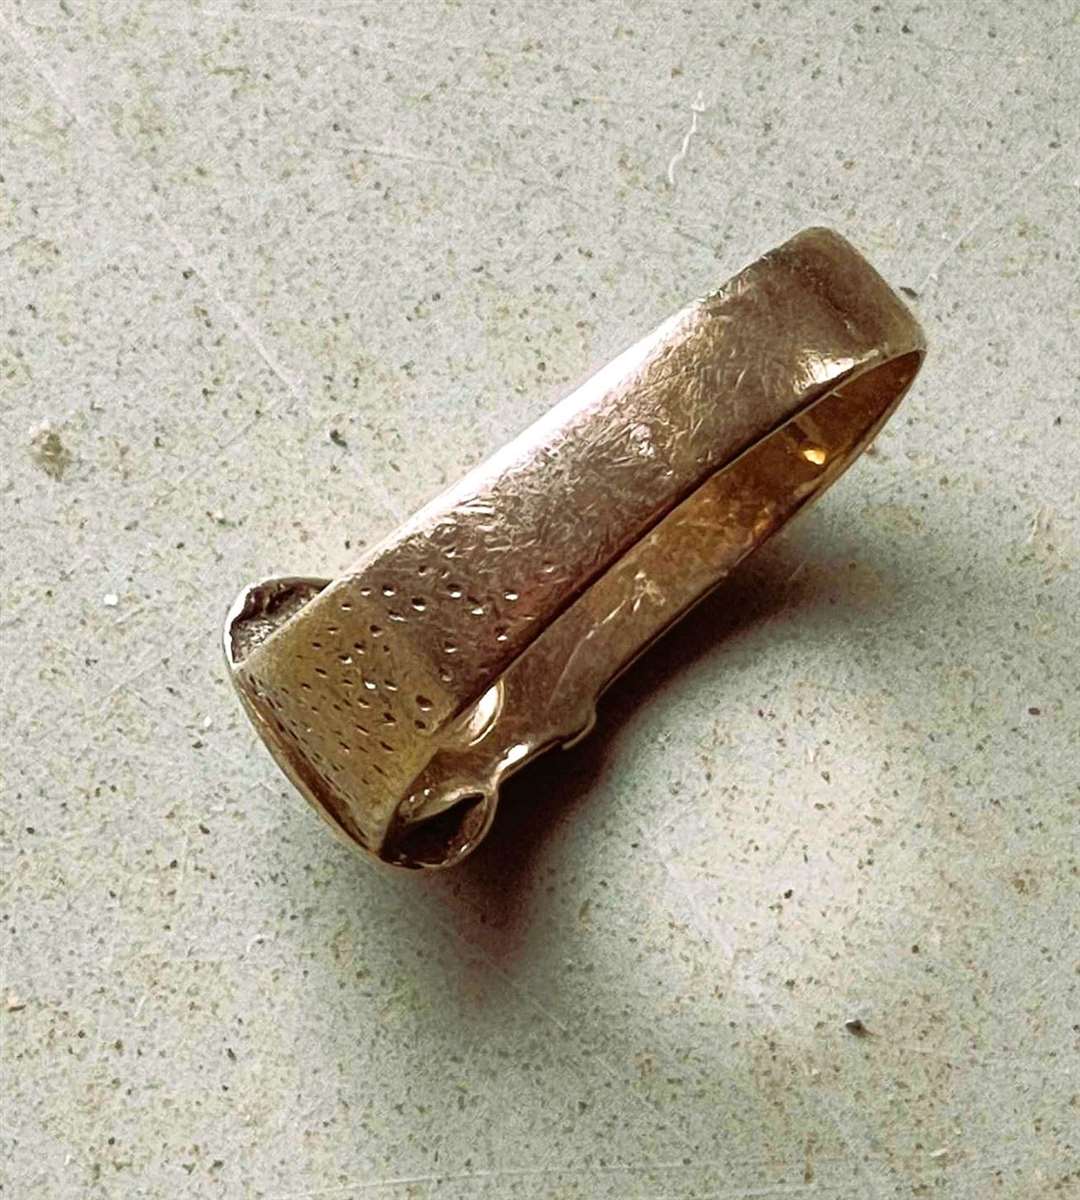 The ring found in a bag of kindling wood at Dunnet forest. A feature of the ring is hidden in the photograph and the rightful owner would know what that is.